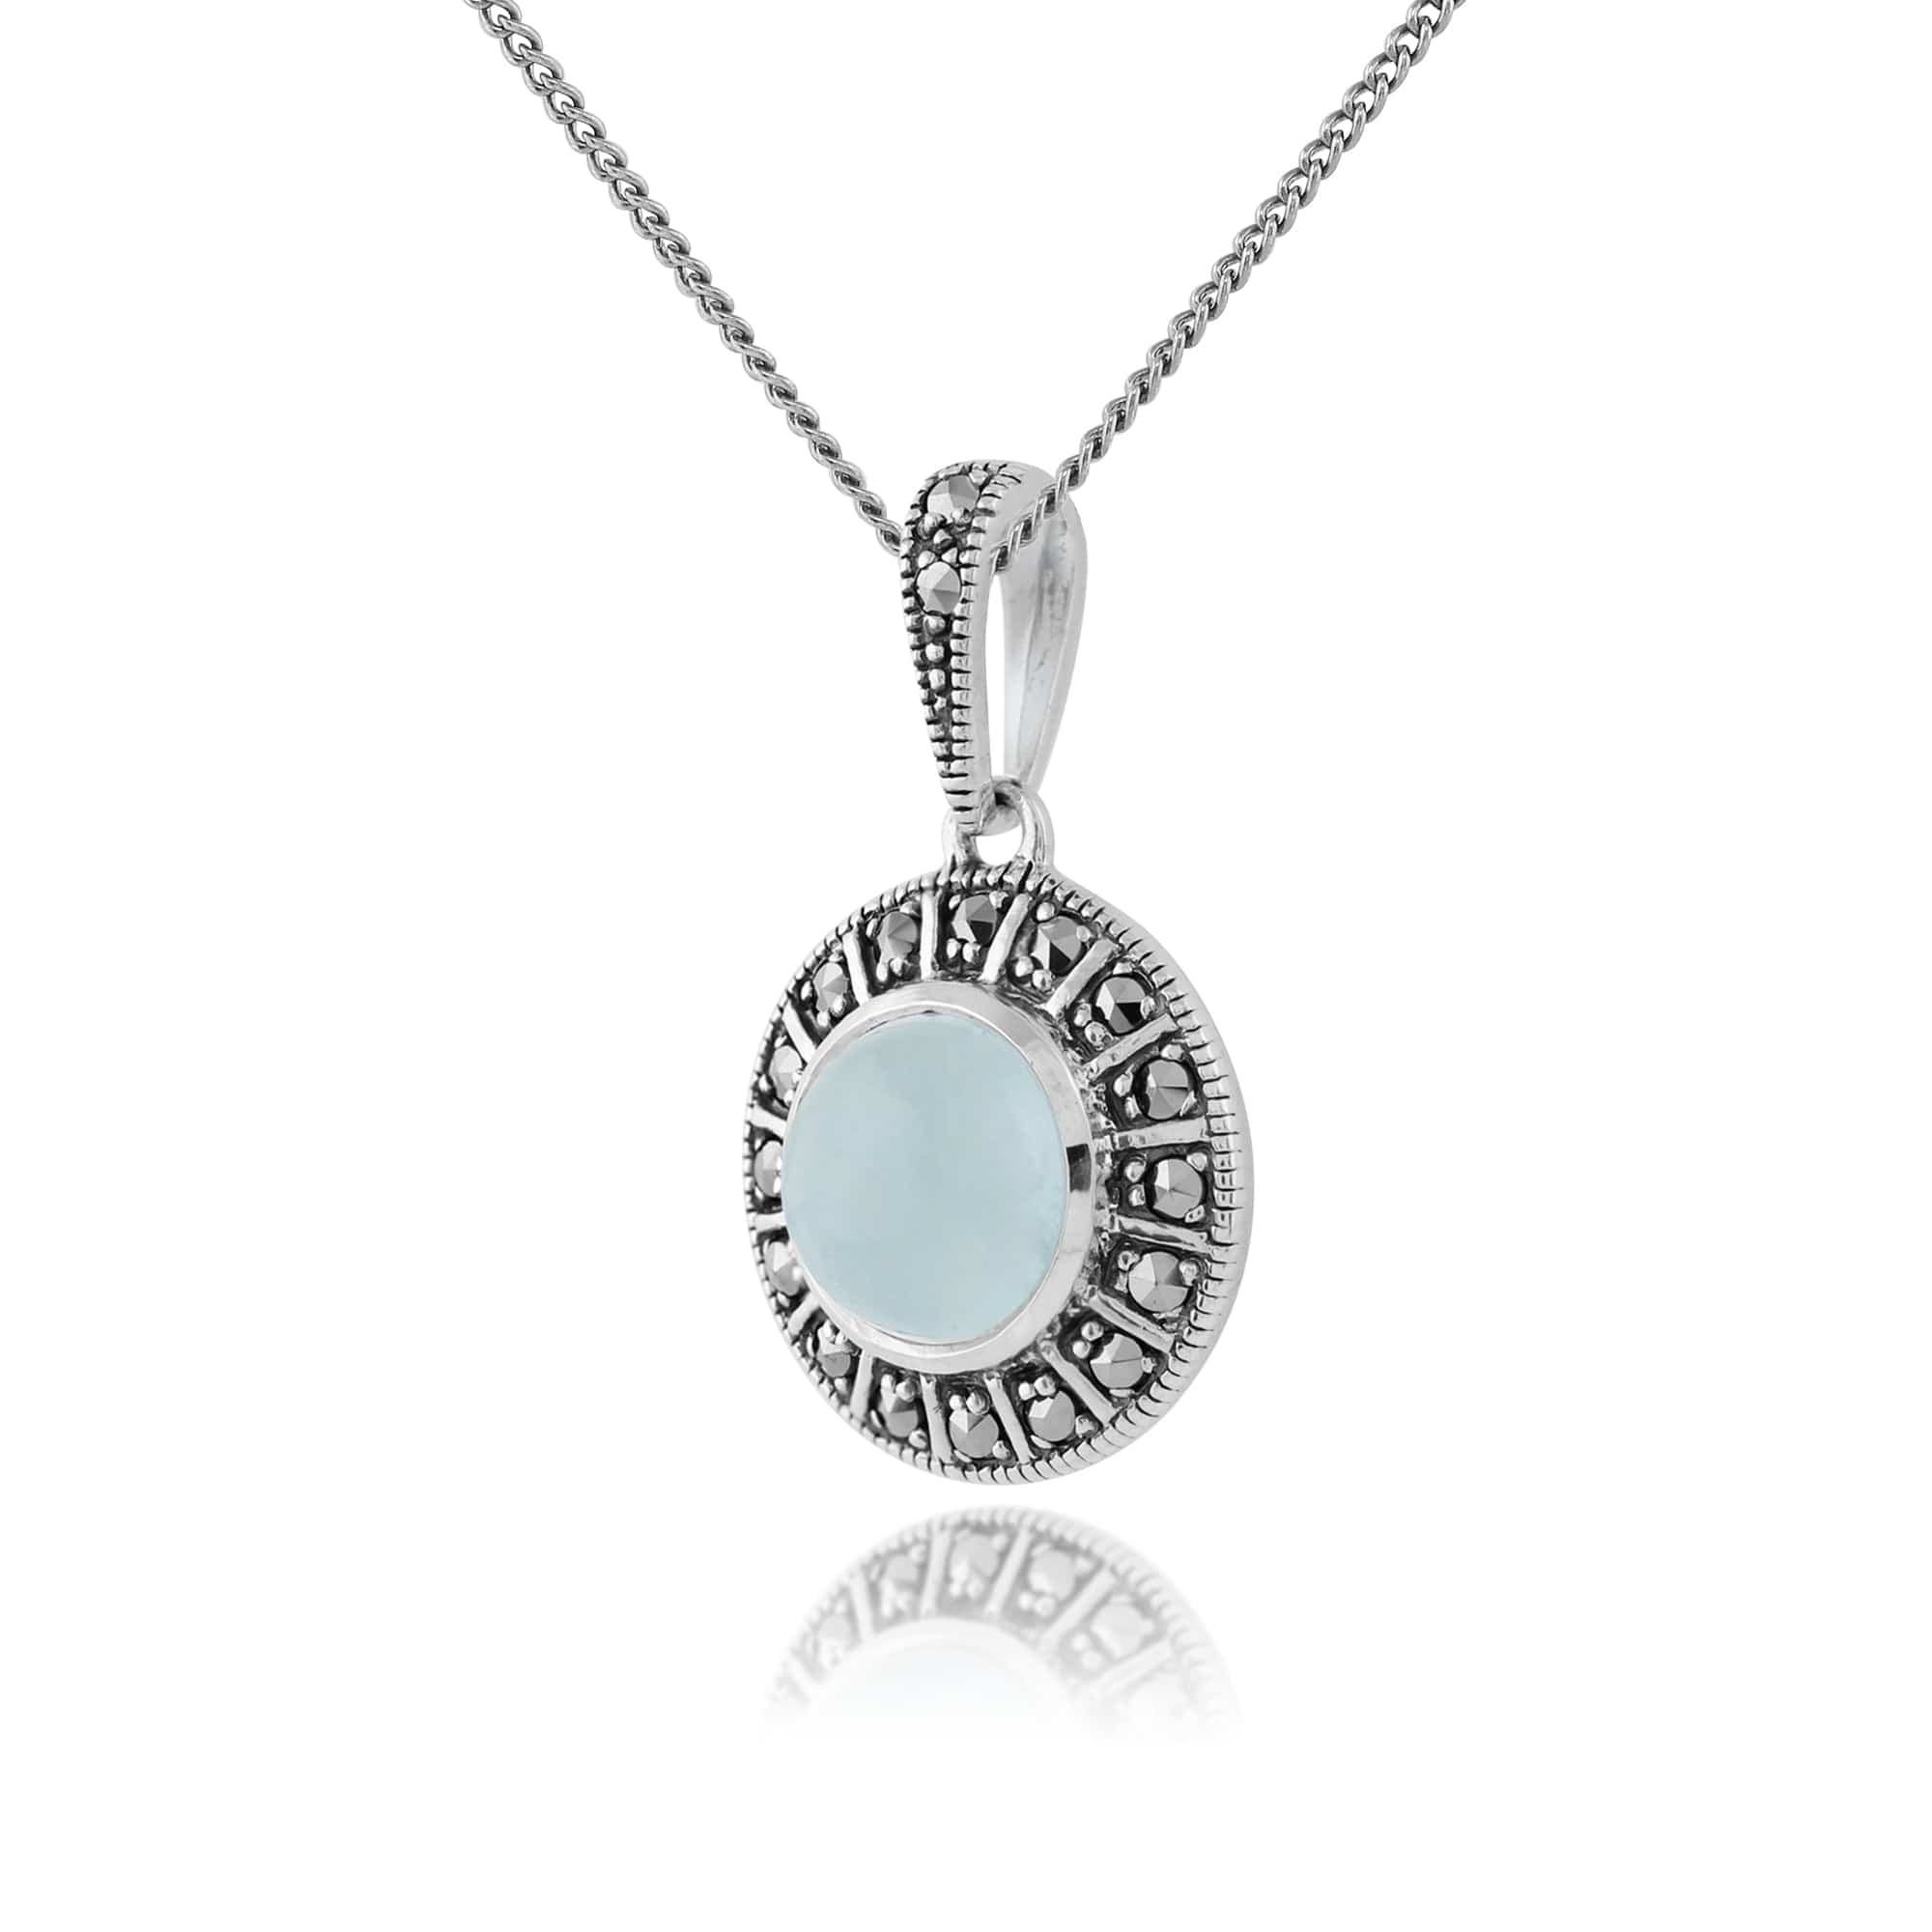 214N646507925 Art Deco Style Round Milky Aquamarine Cabochon & Marcasite Pendant in 925 Sterling Silver 2